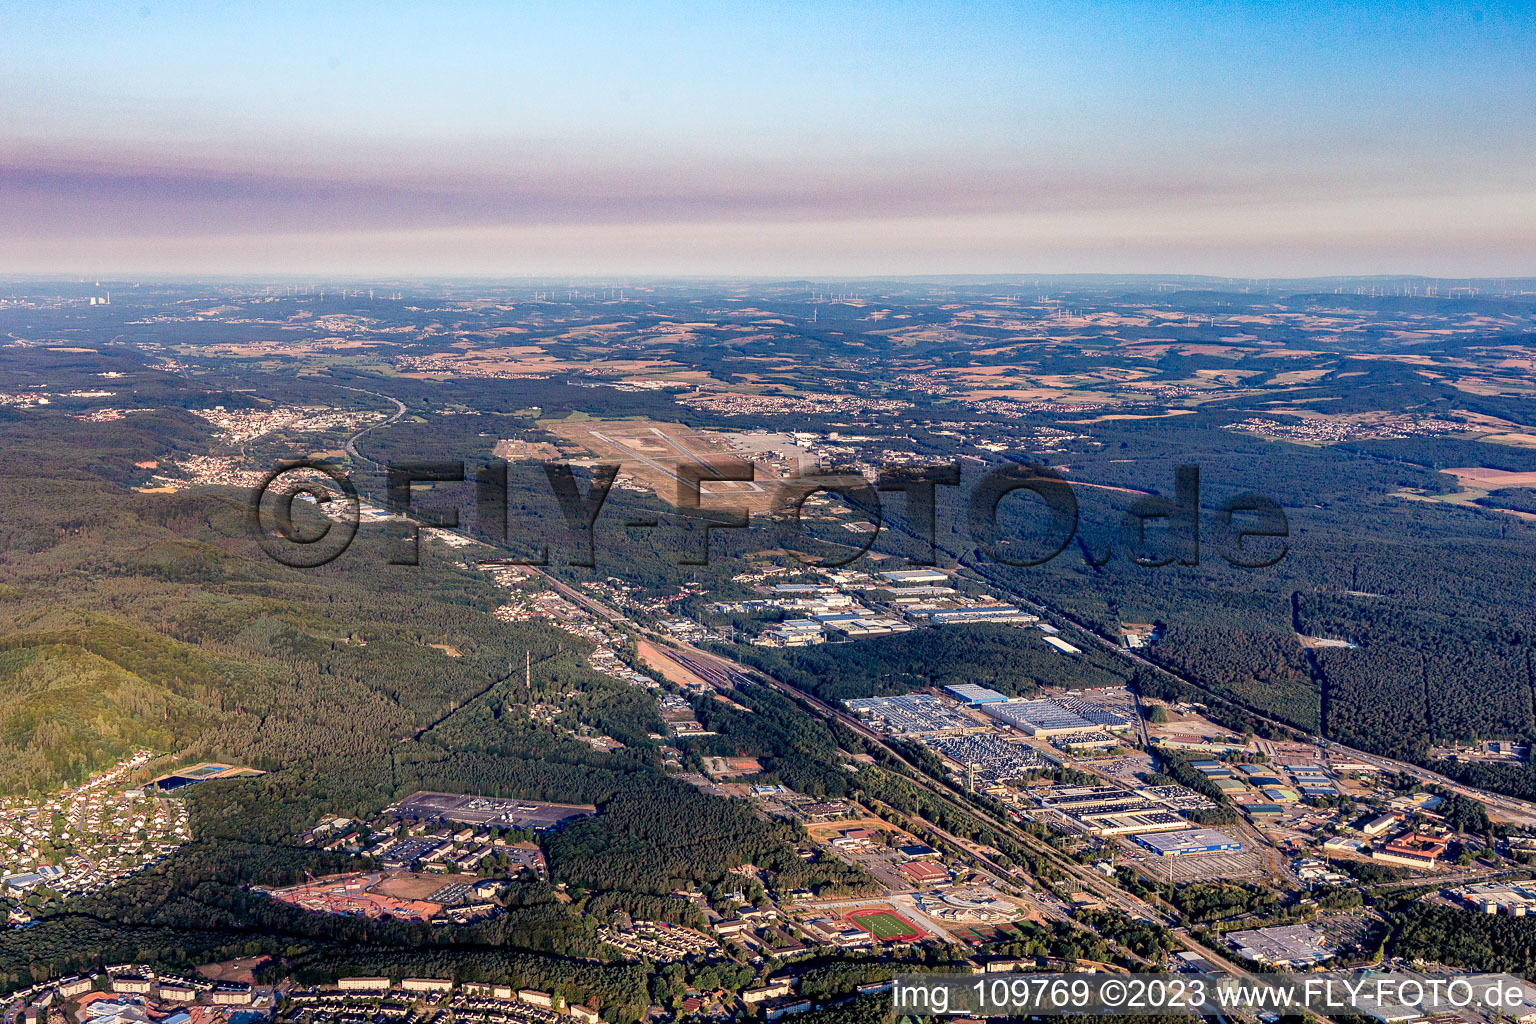 Bird's eye view of US Air Base in Ramstein in the state Rhineland-Palatinate, Germany